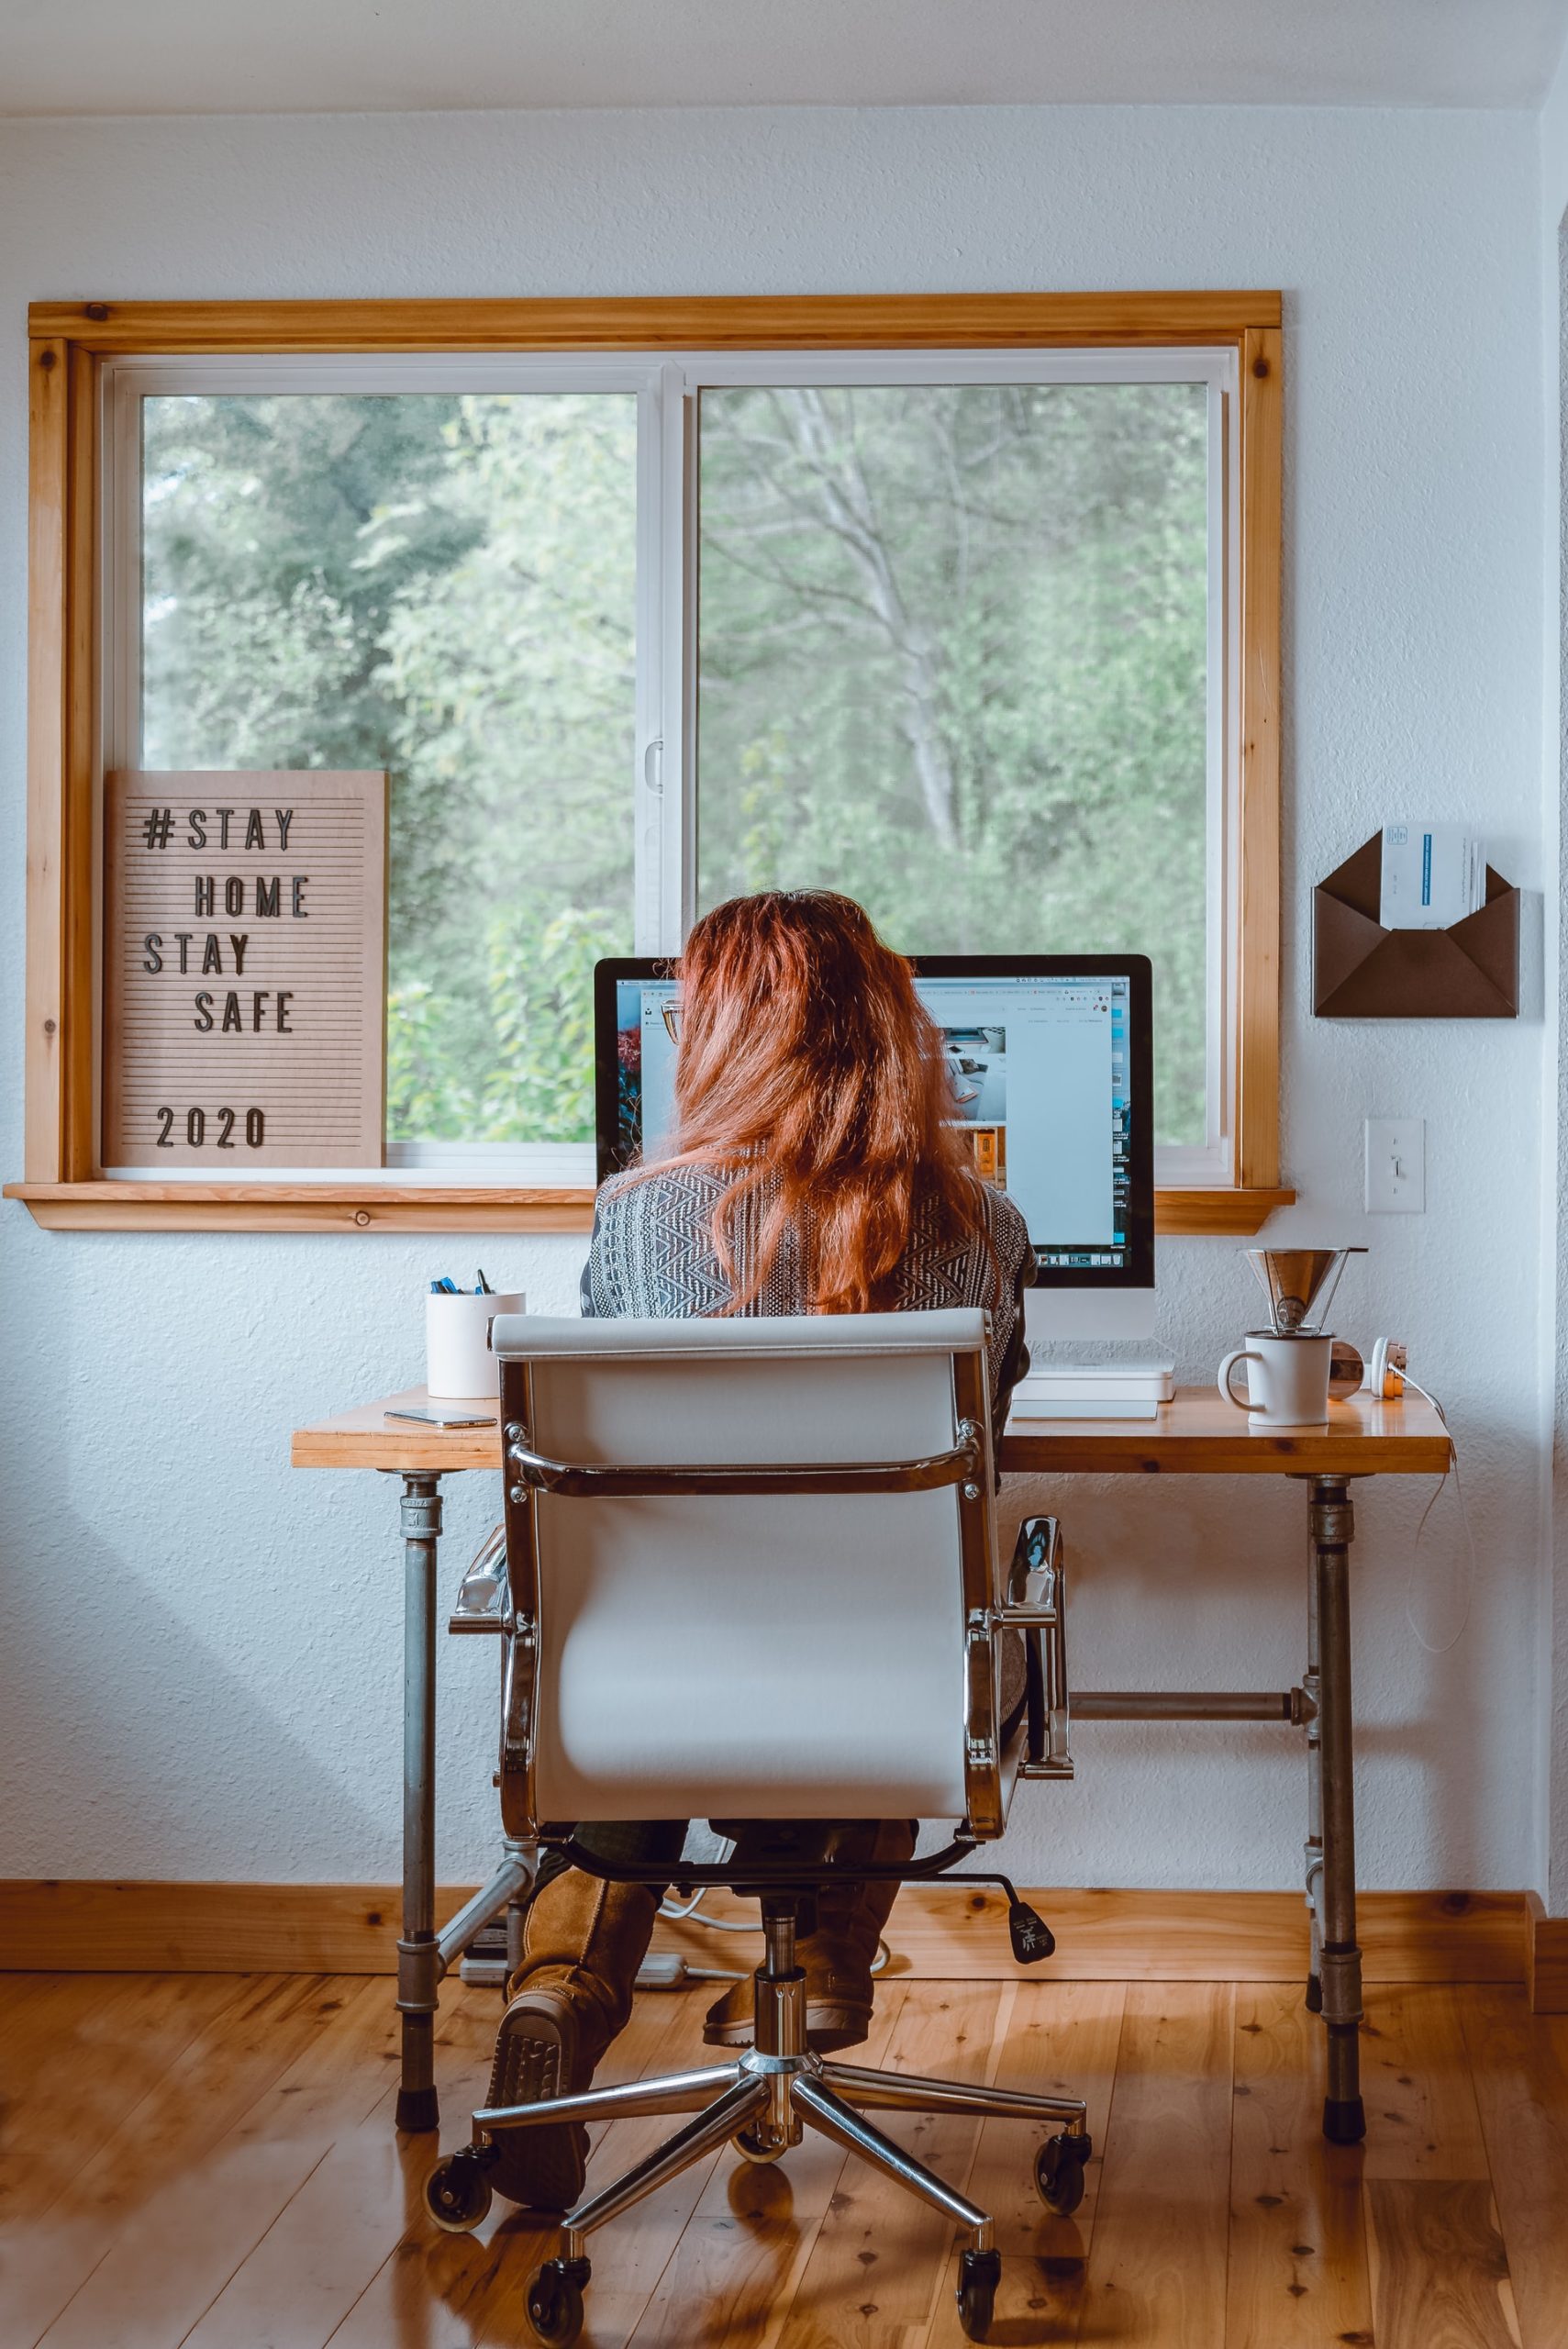 Top 10 Tips for Being Productive When Working from Home